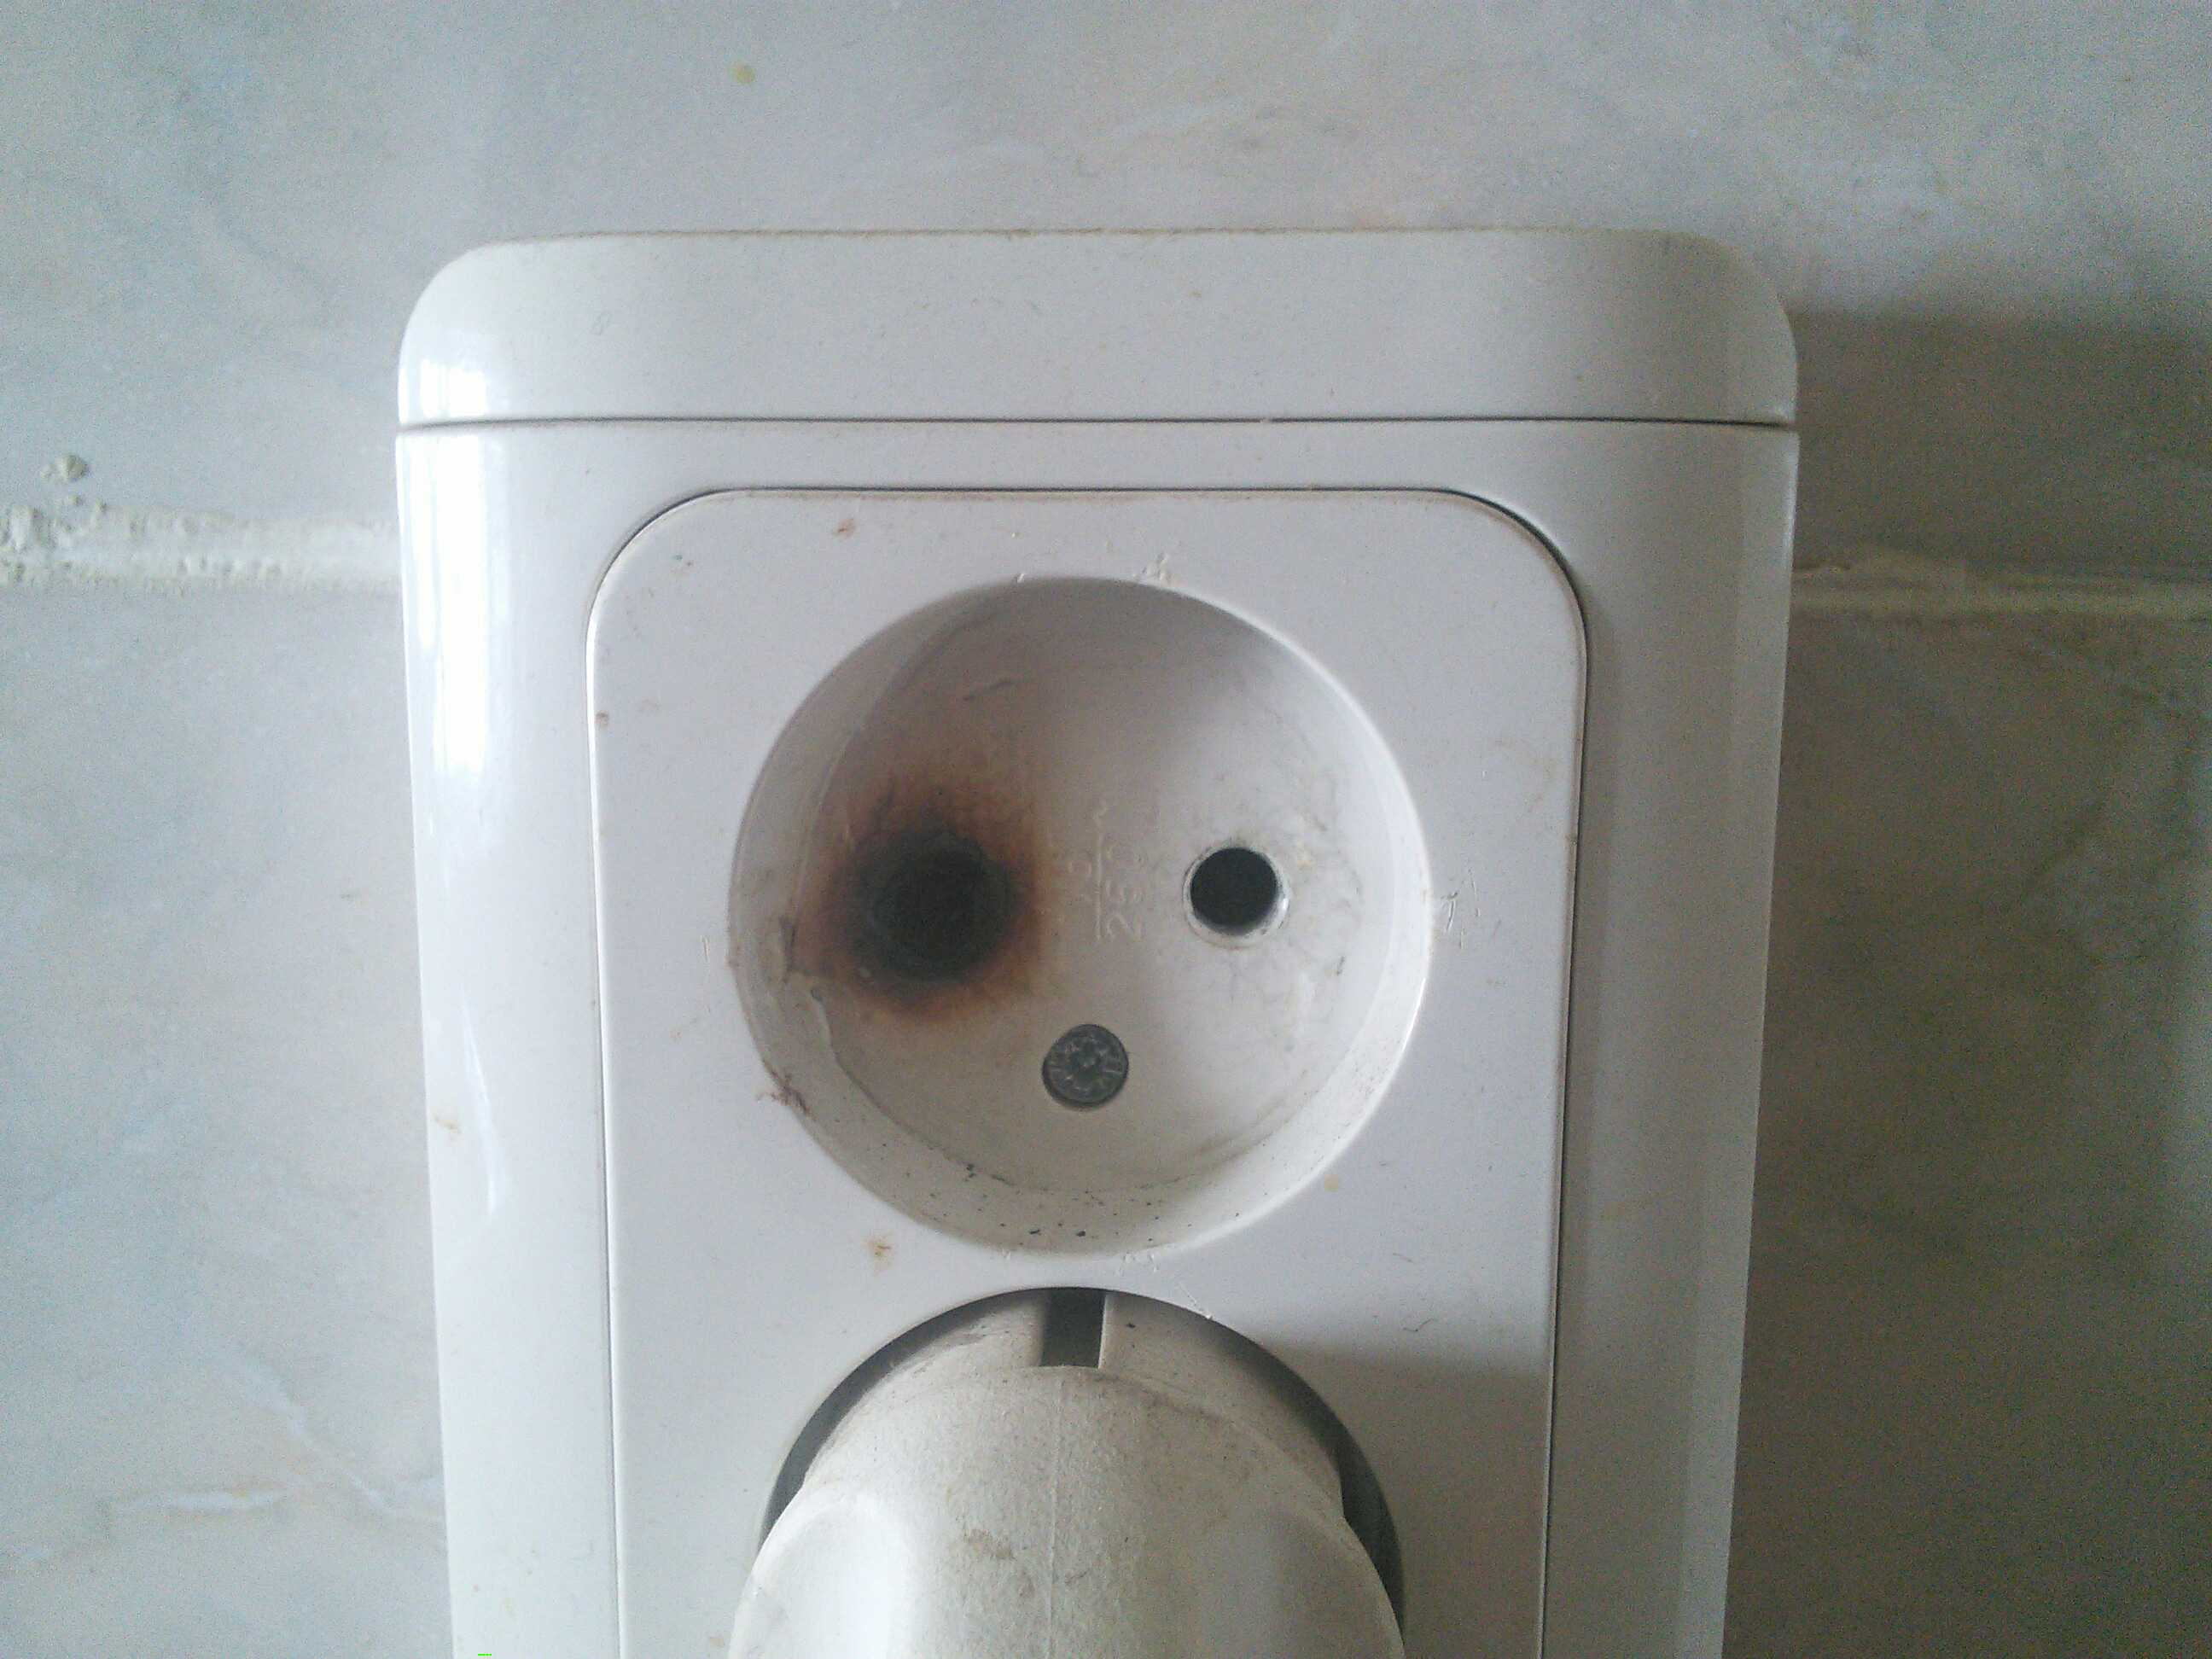 This electrical outlet looks like someone who got into a fight.